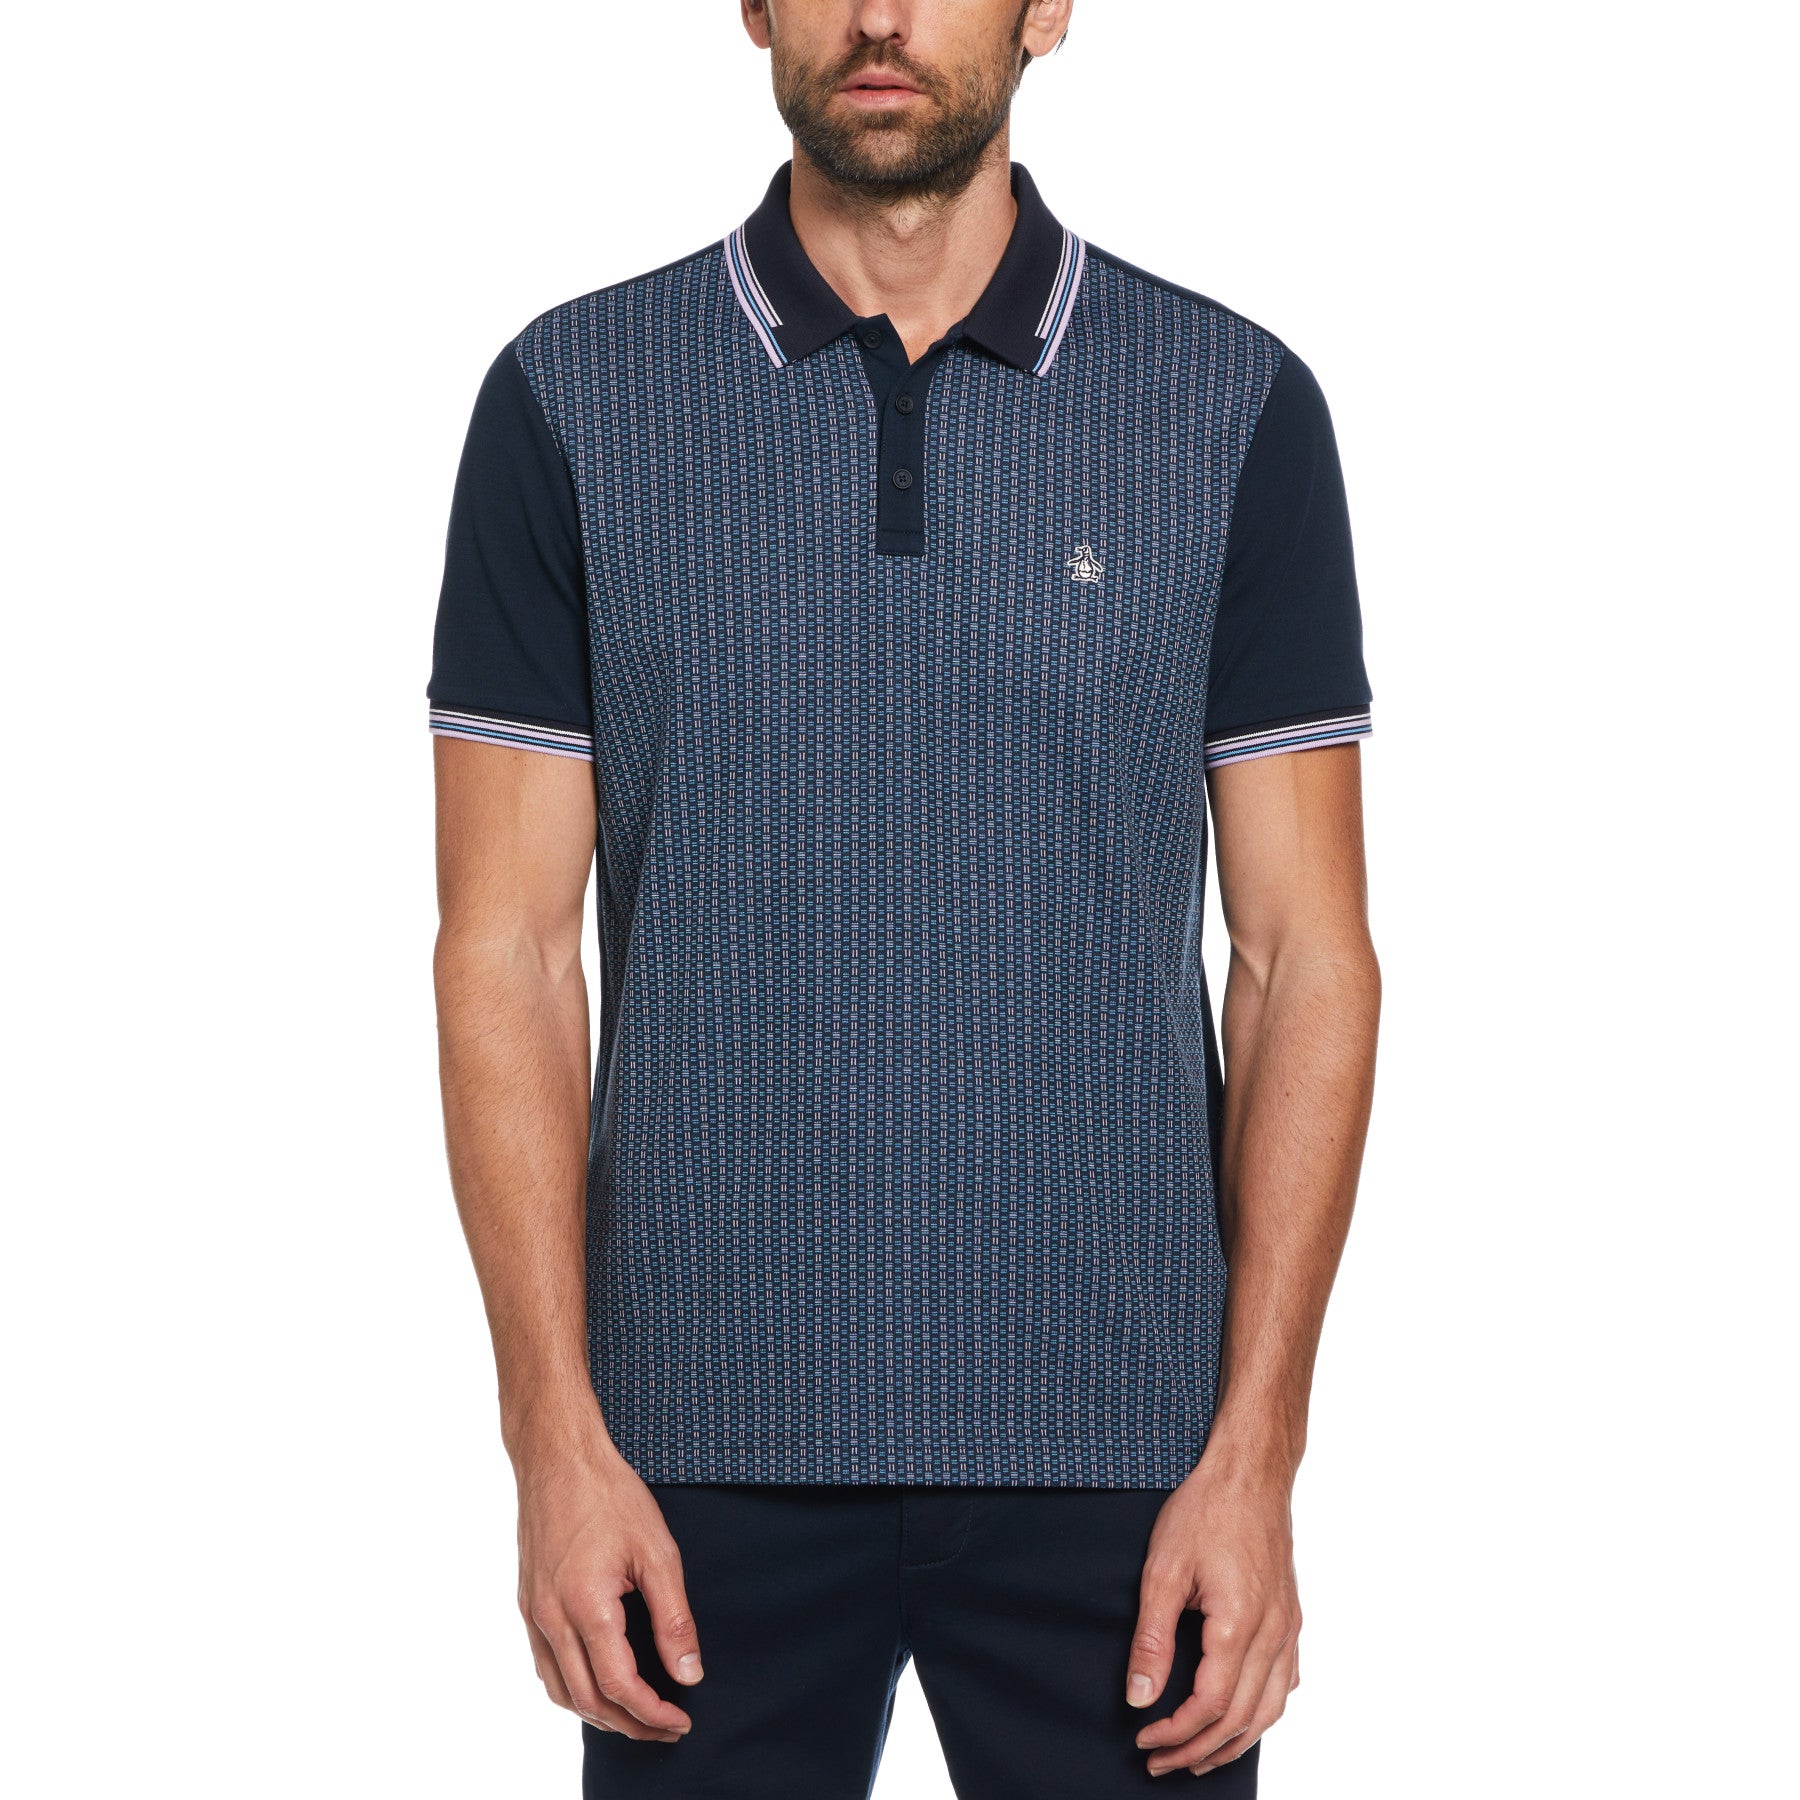 View Jacquard Front Basketweave Print Polo Shirt In Dark Sapphire information